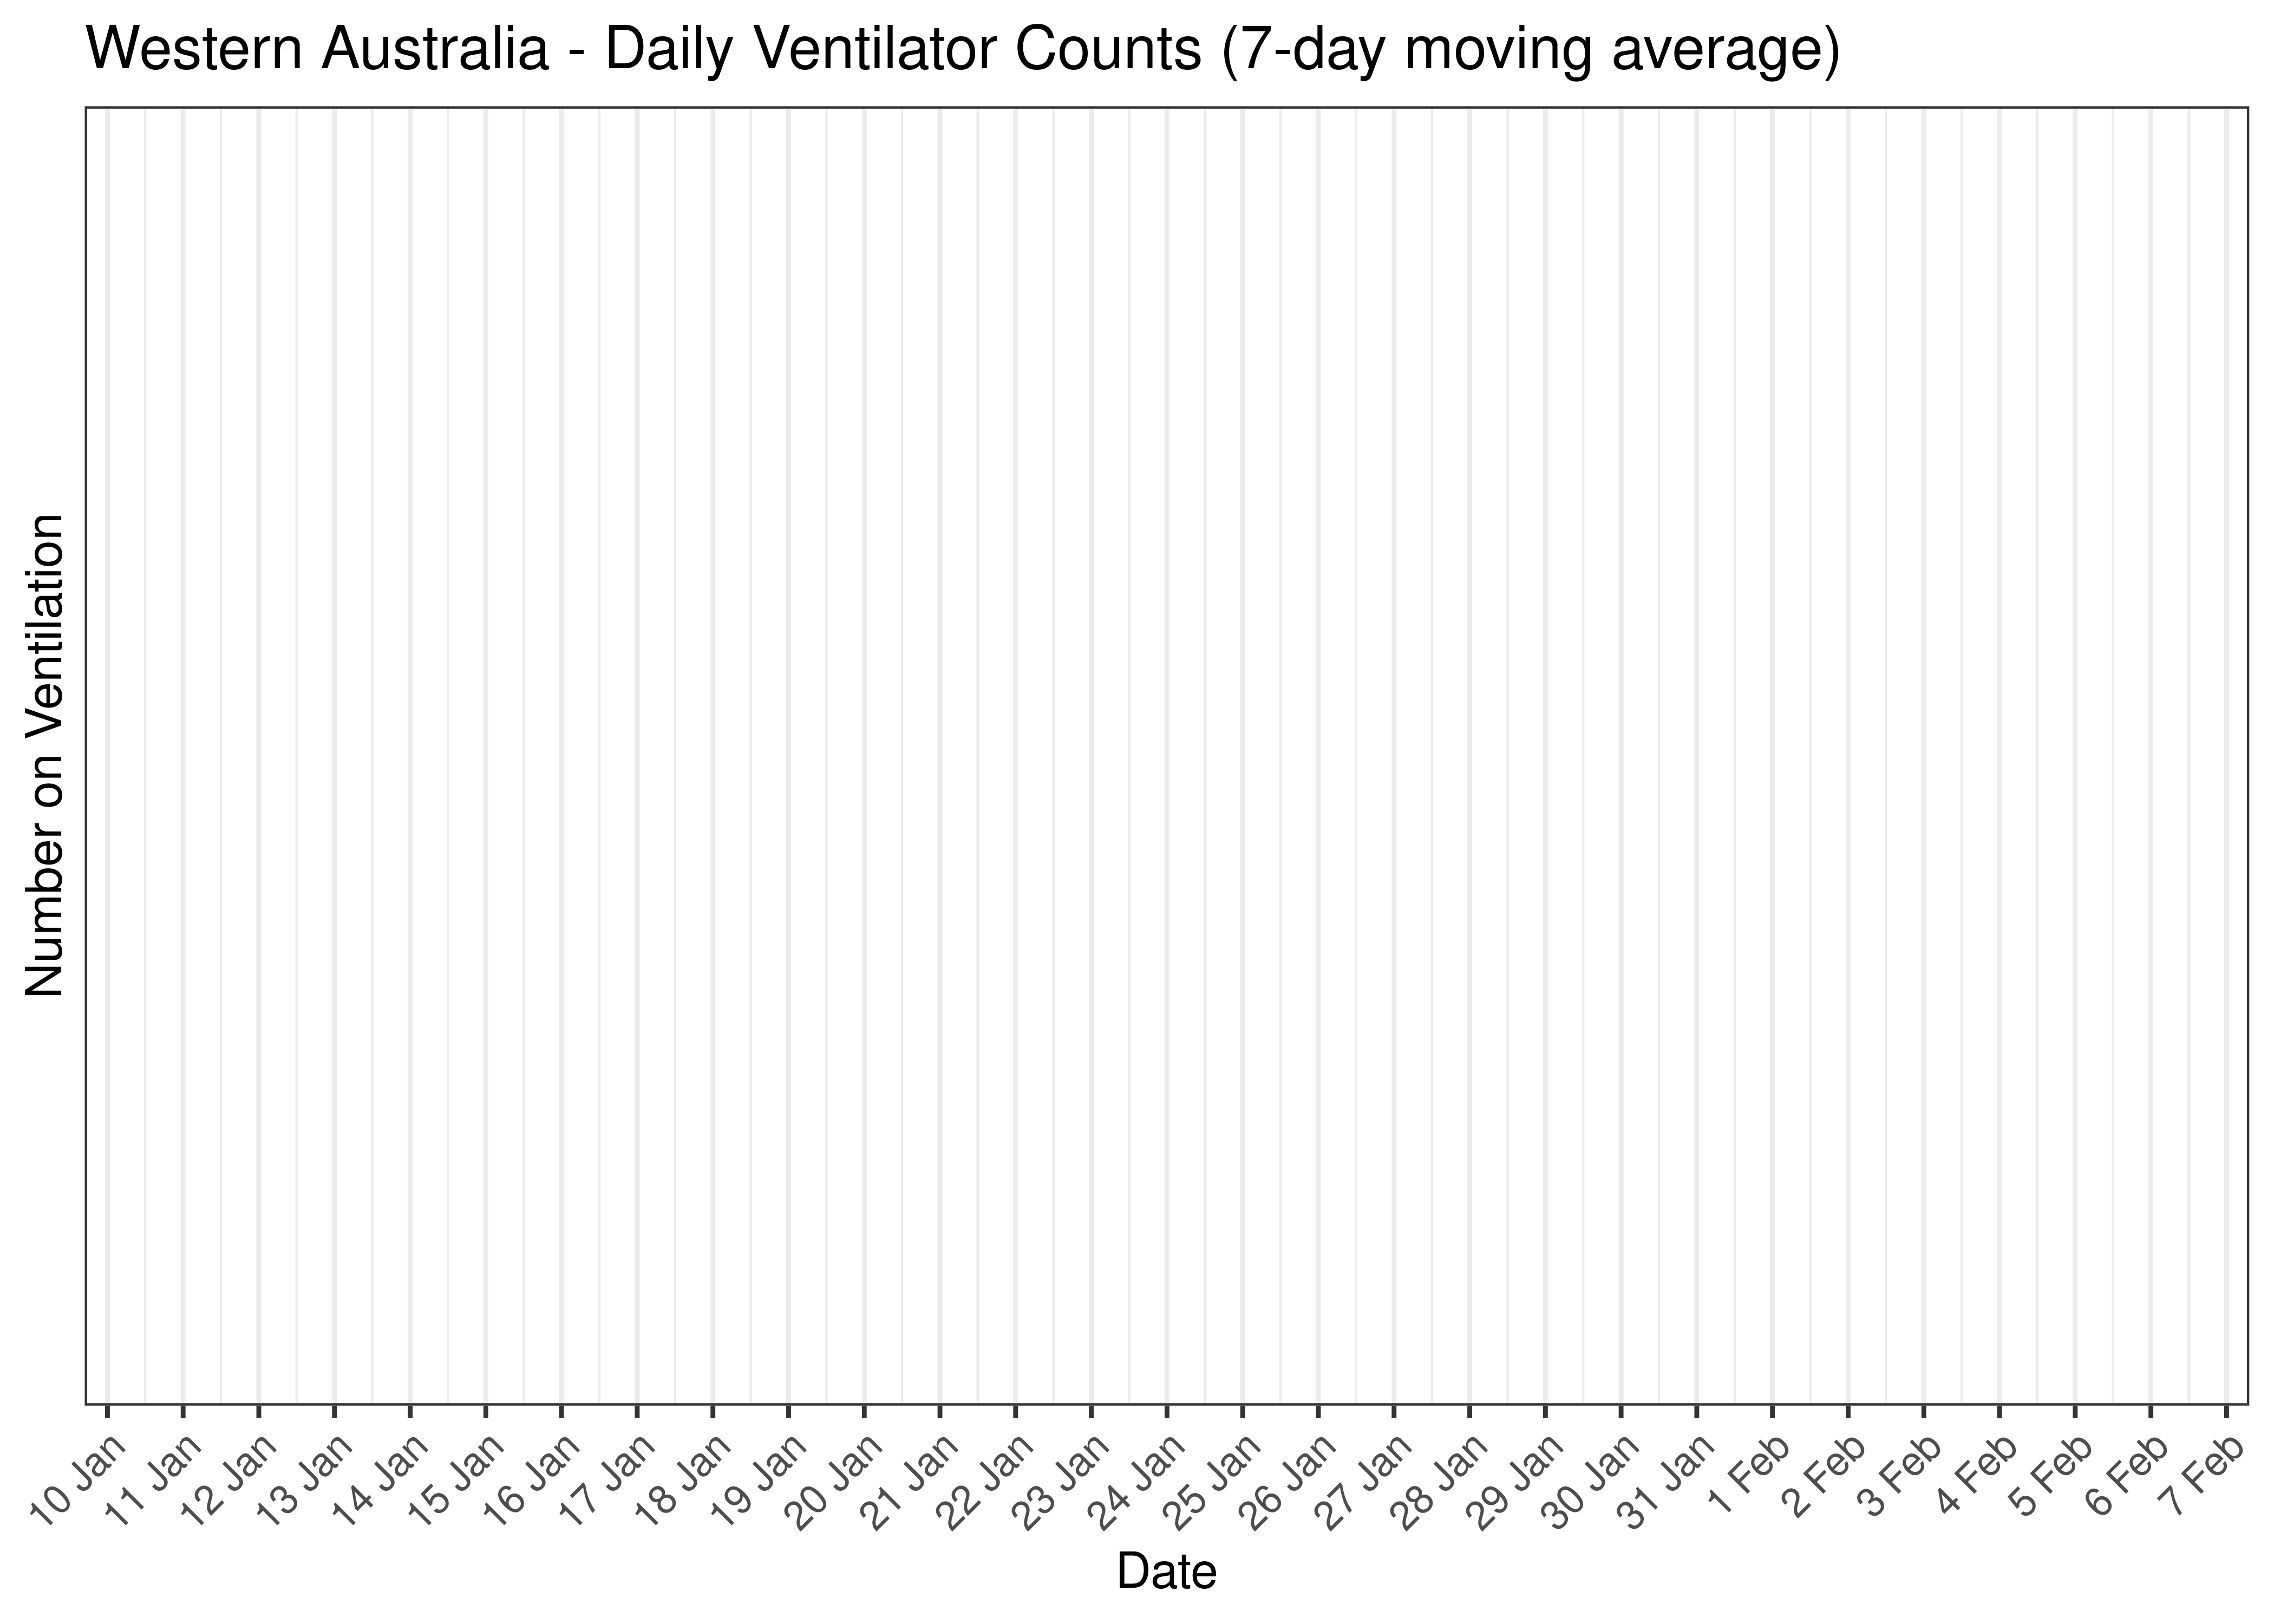 Western Australia - Daily Ventilator Counts for Last 30-days (7-day moving average)